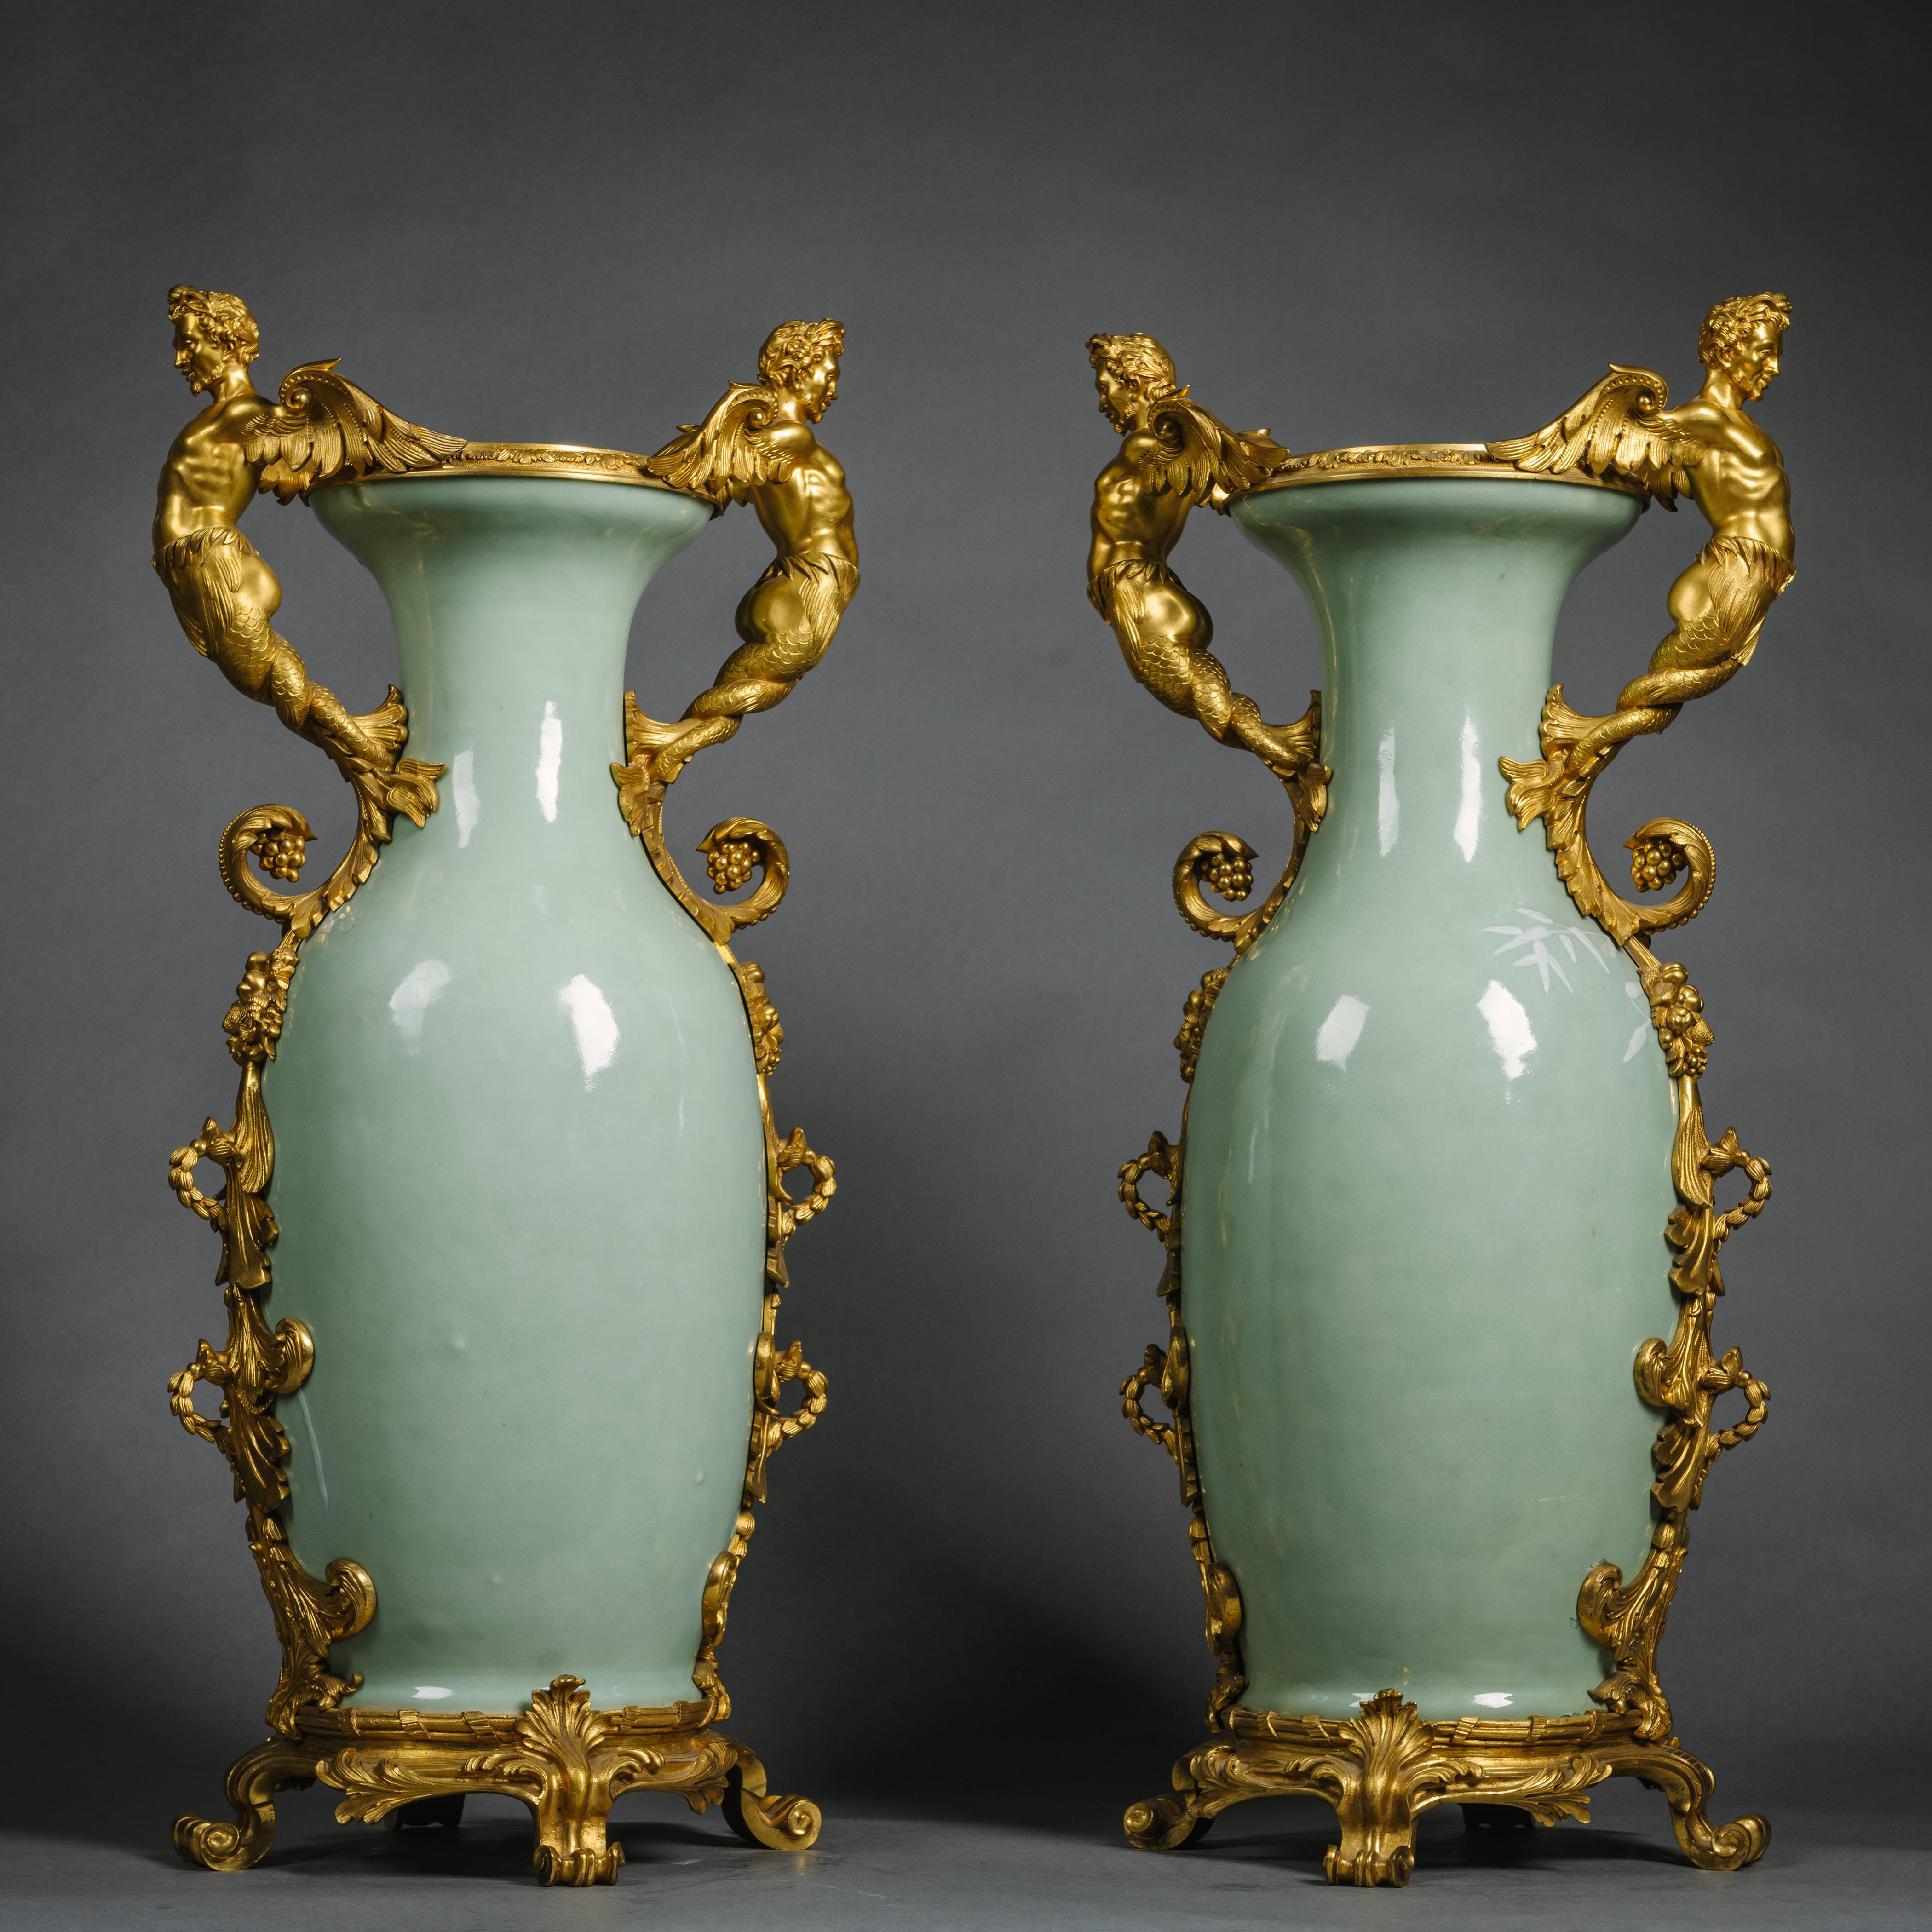 Louis XVI Pair of Gilt-Bronze Mounted Chinese Celadon-Ground Porcelain Vases For Sale